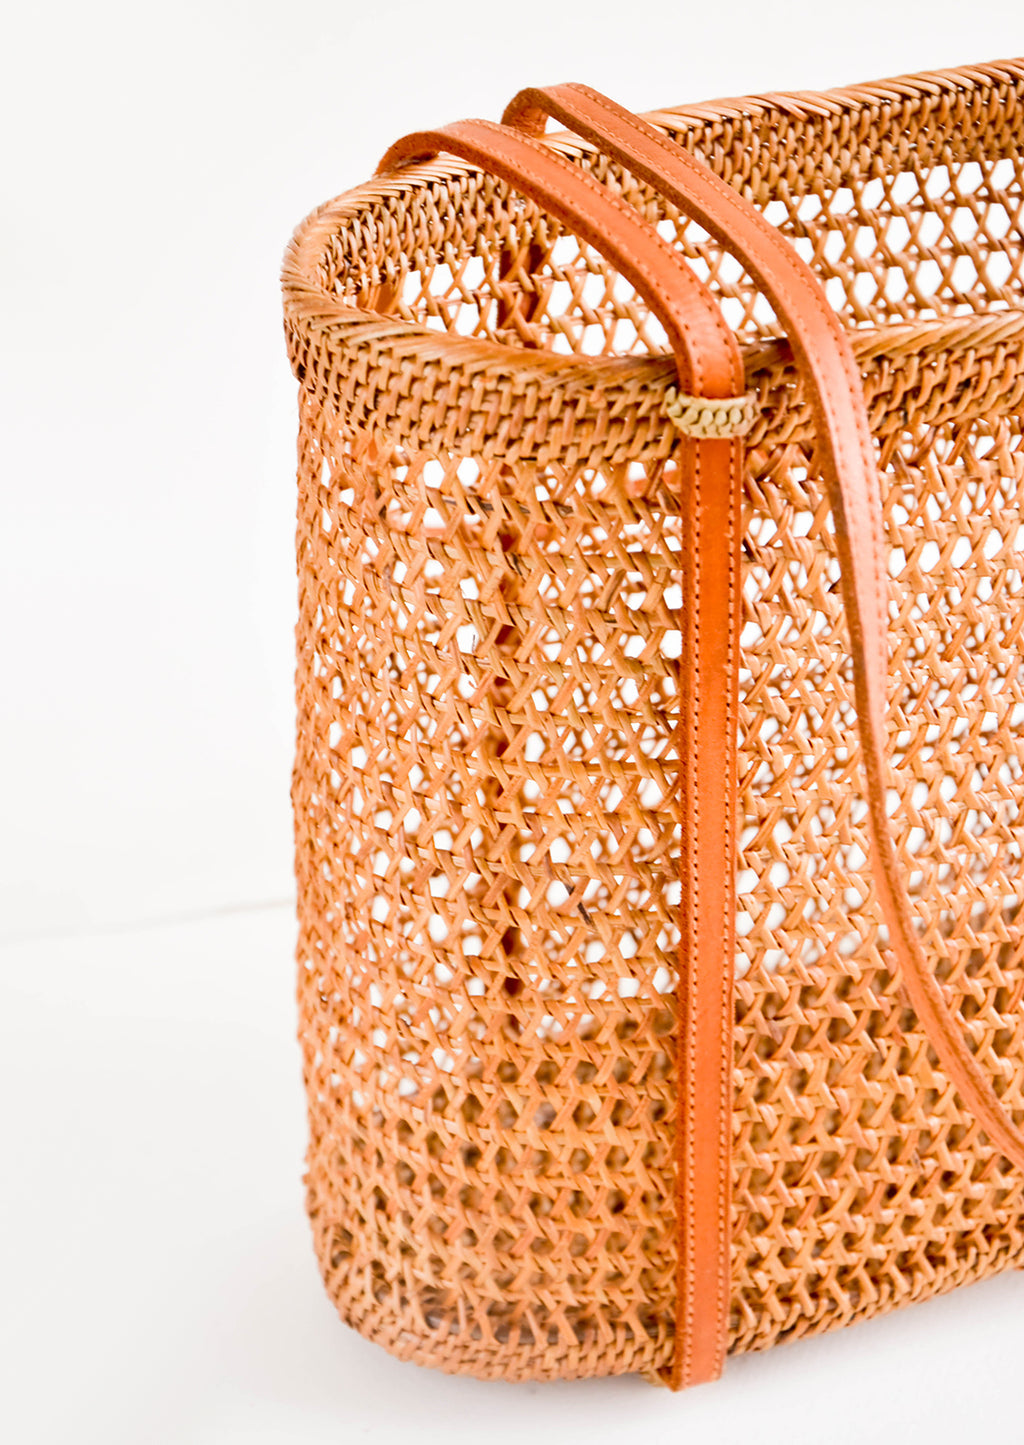 2: Shoulder tote bag with thin leather straps, made from open-weave rattan with a tanned effect